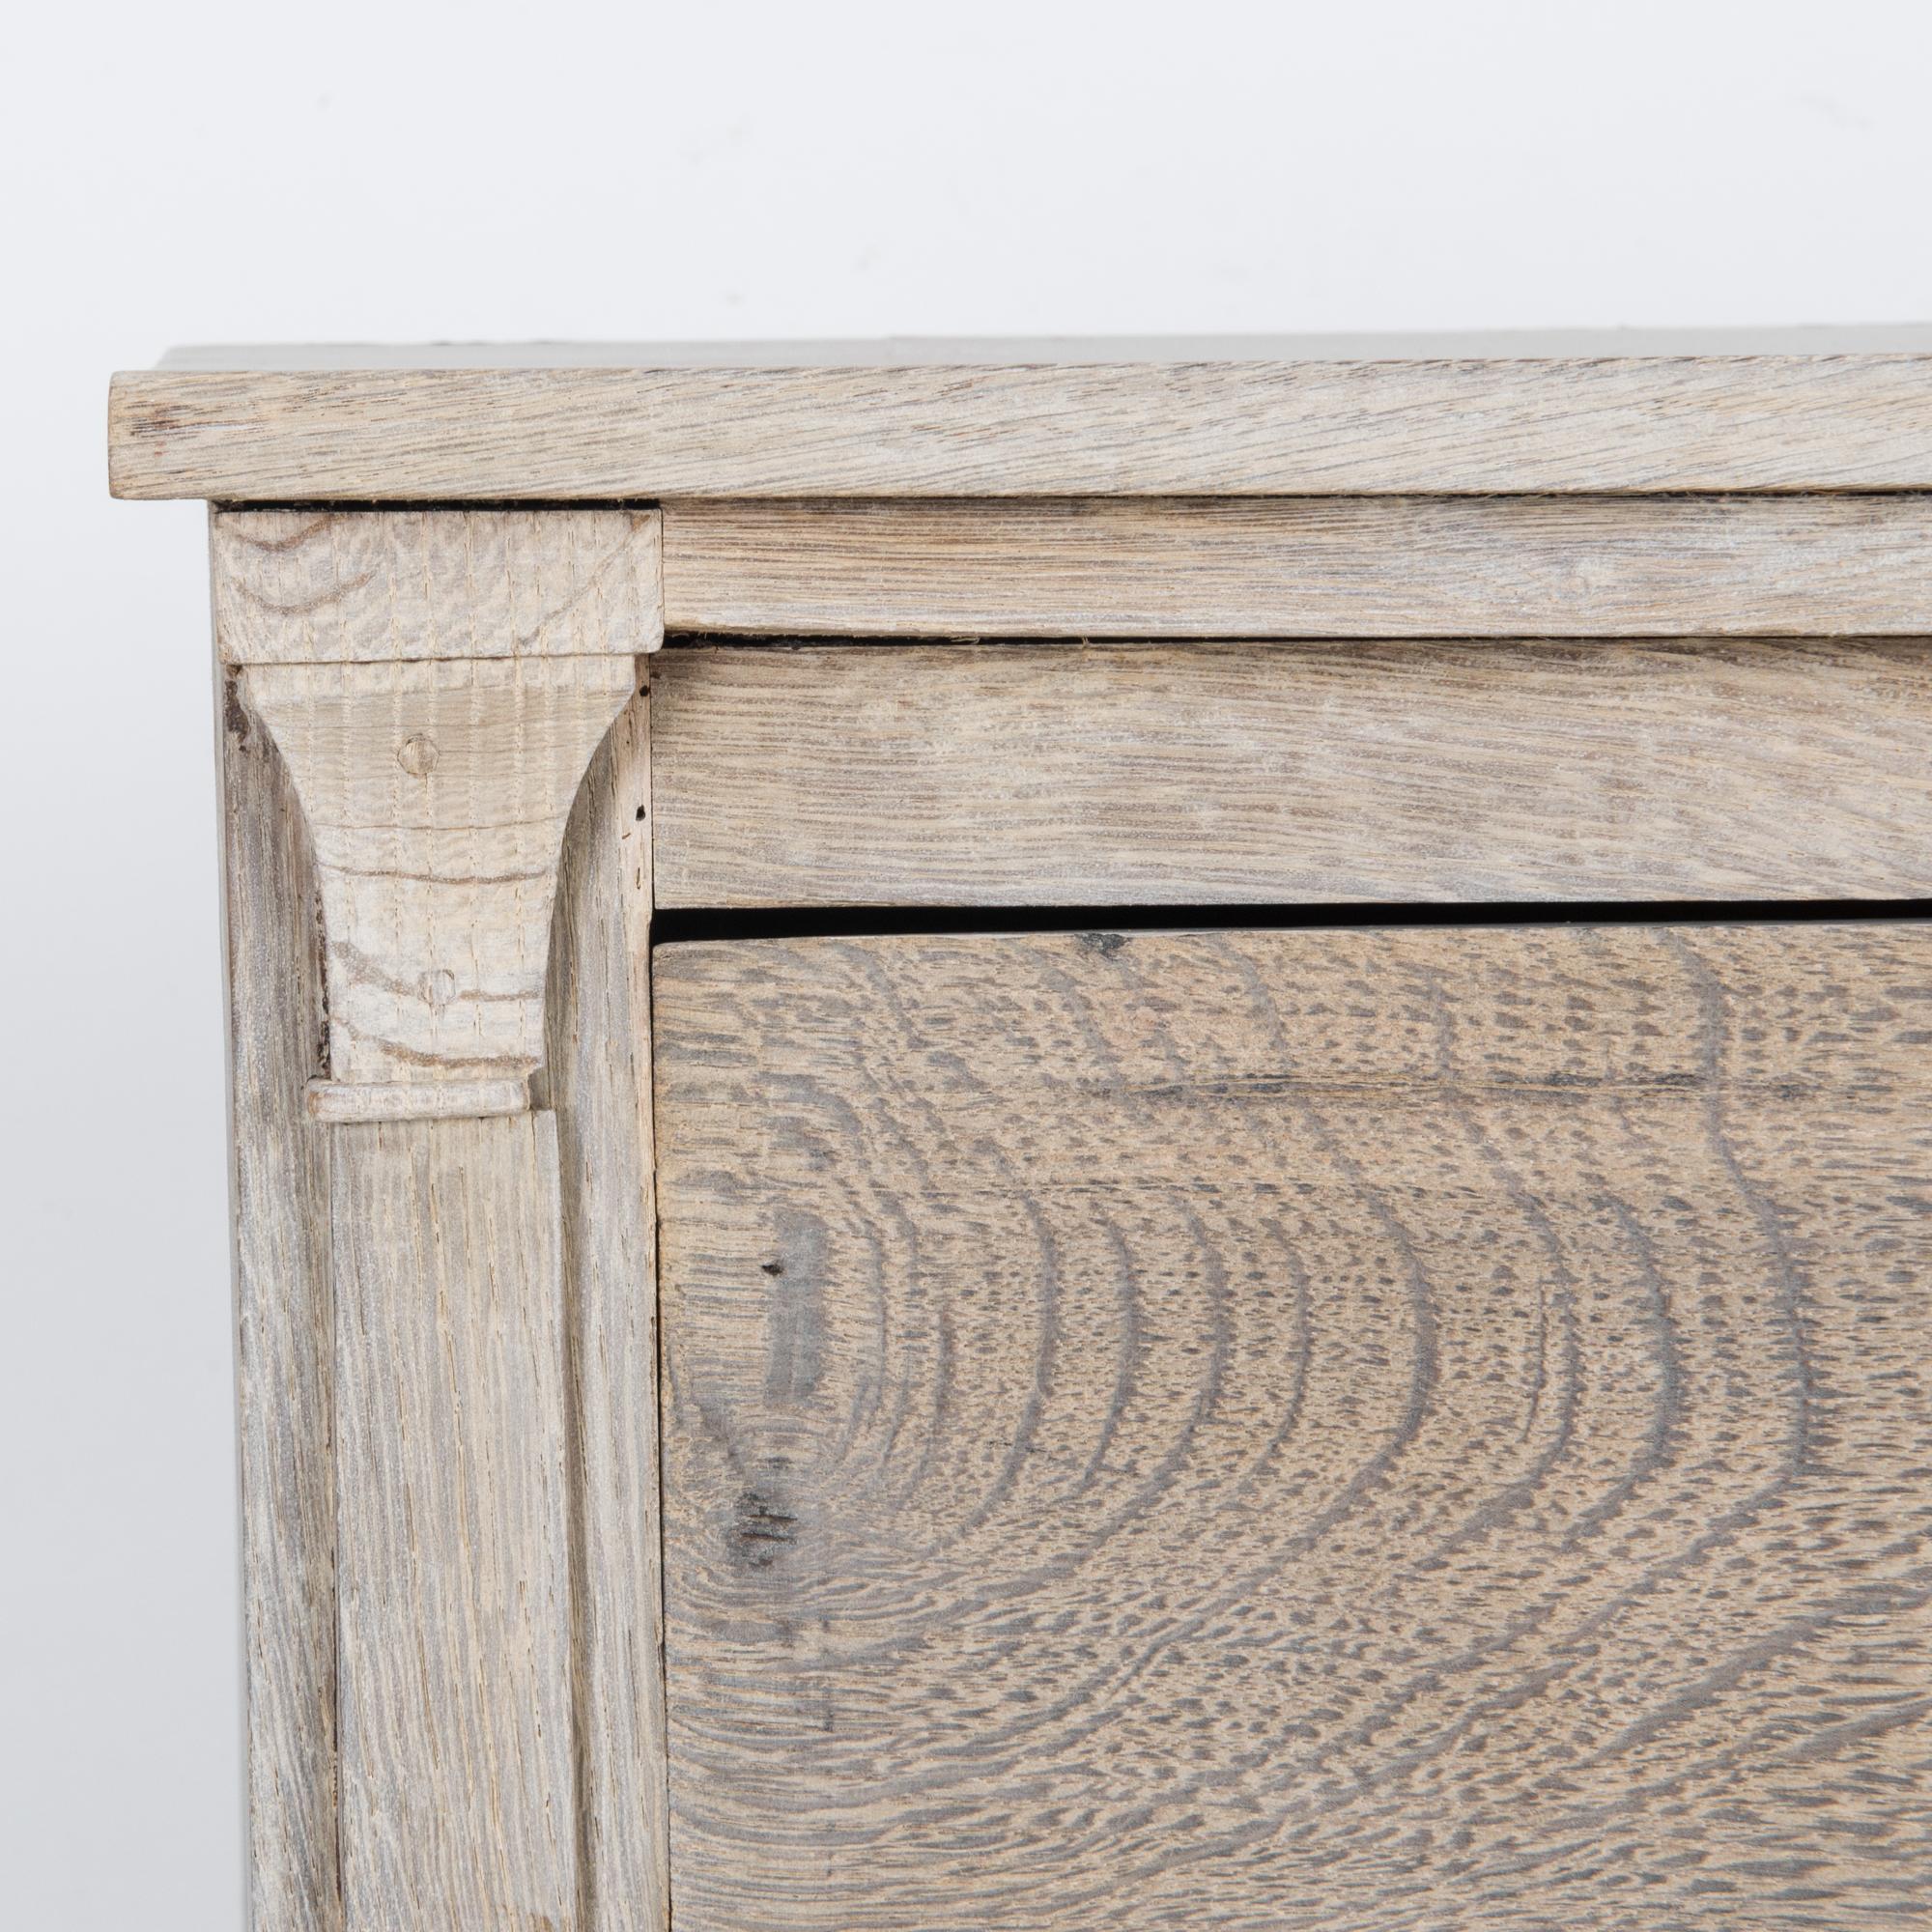 An antique oak chest of drawers from 1880s France. The upright form is enhanced by column moldings which unfold into graceful cornices, a subtle neoclassical accent. A liquid grain floats across the surface of the wood, restored to a pale natural